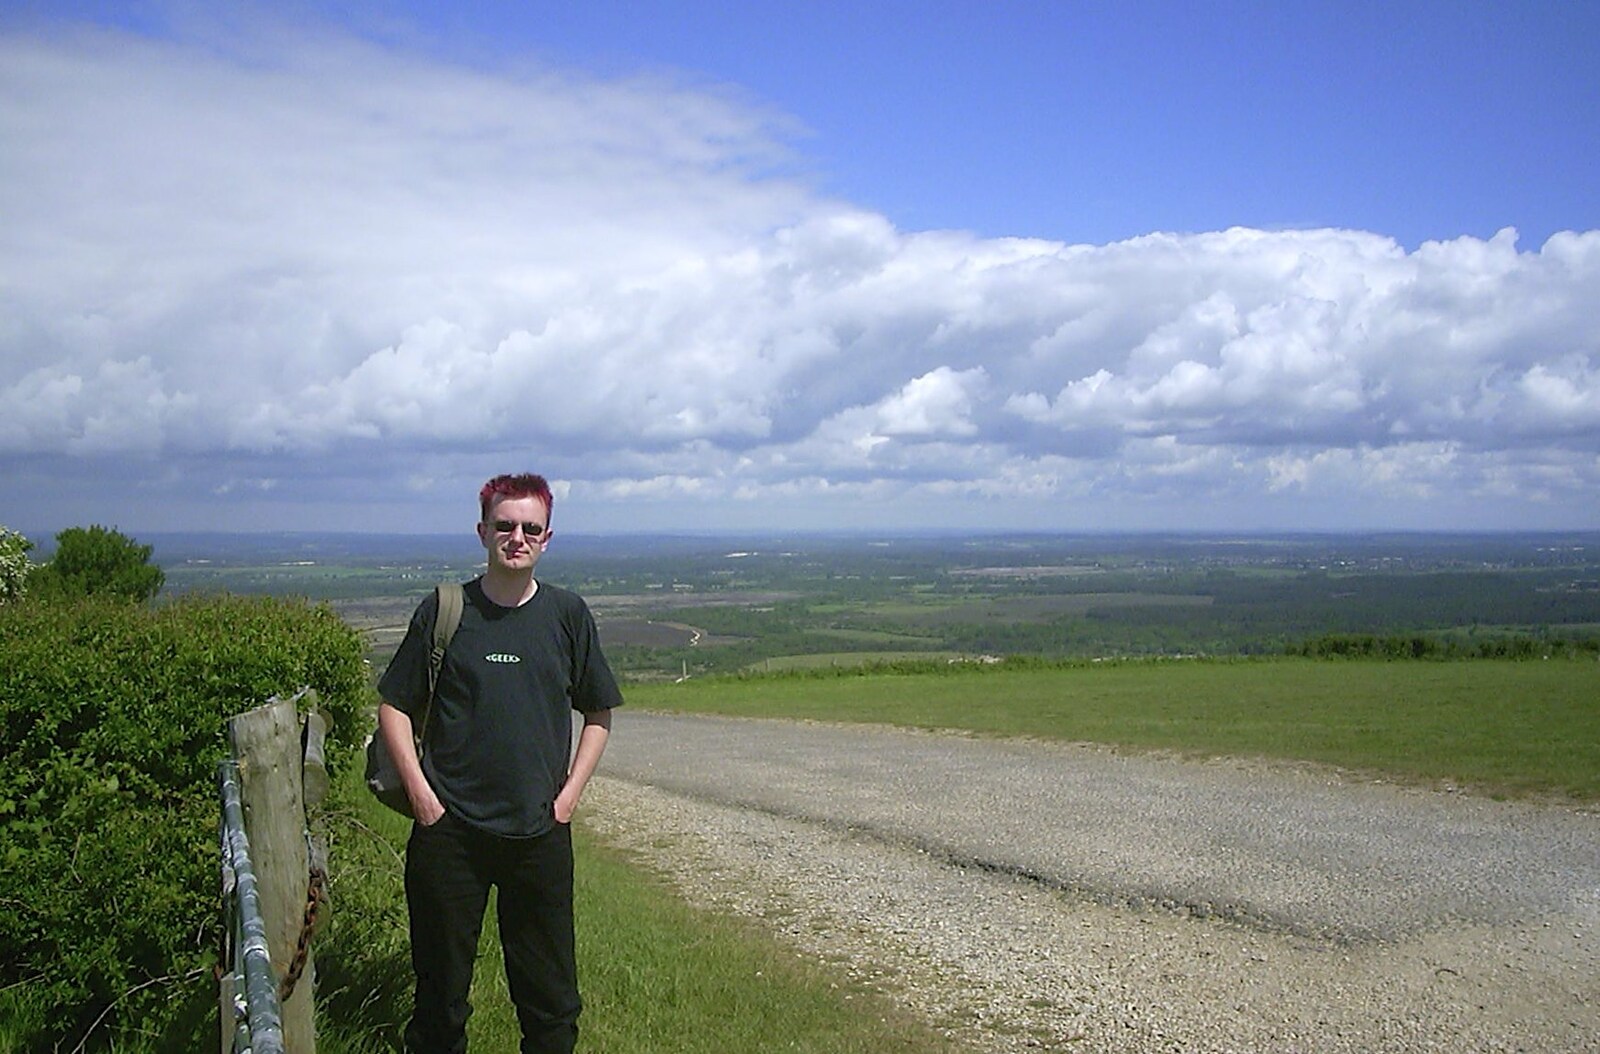 Corfe Castle Camping, Corfe, Dorset - 30th May 2004: A selfie on Povington - this camera's 10,000th pic